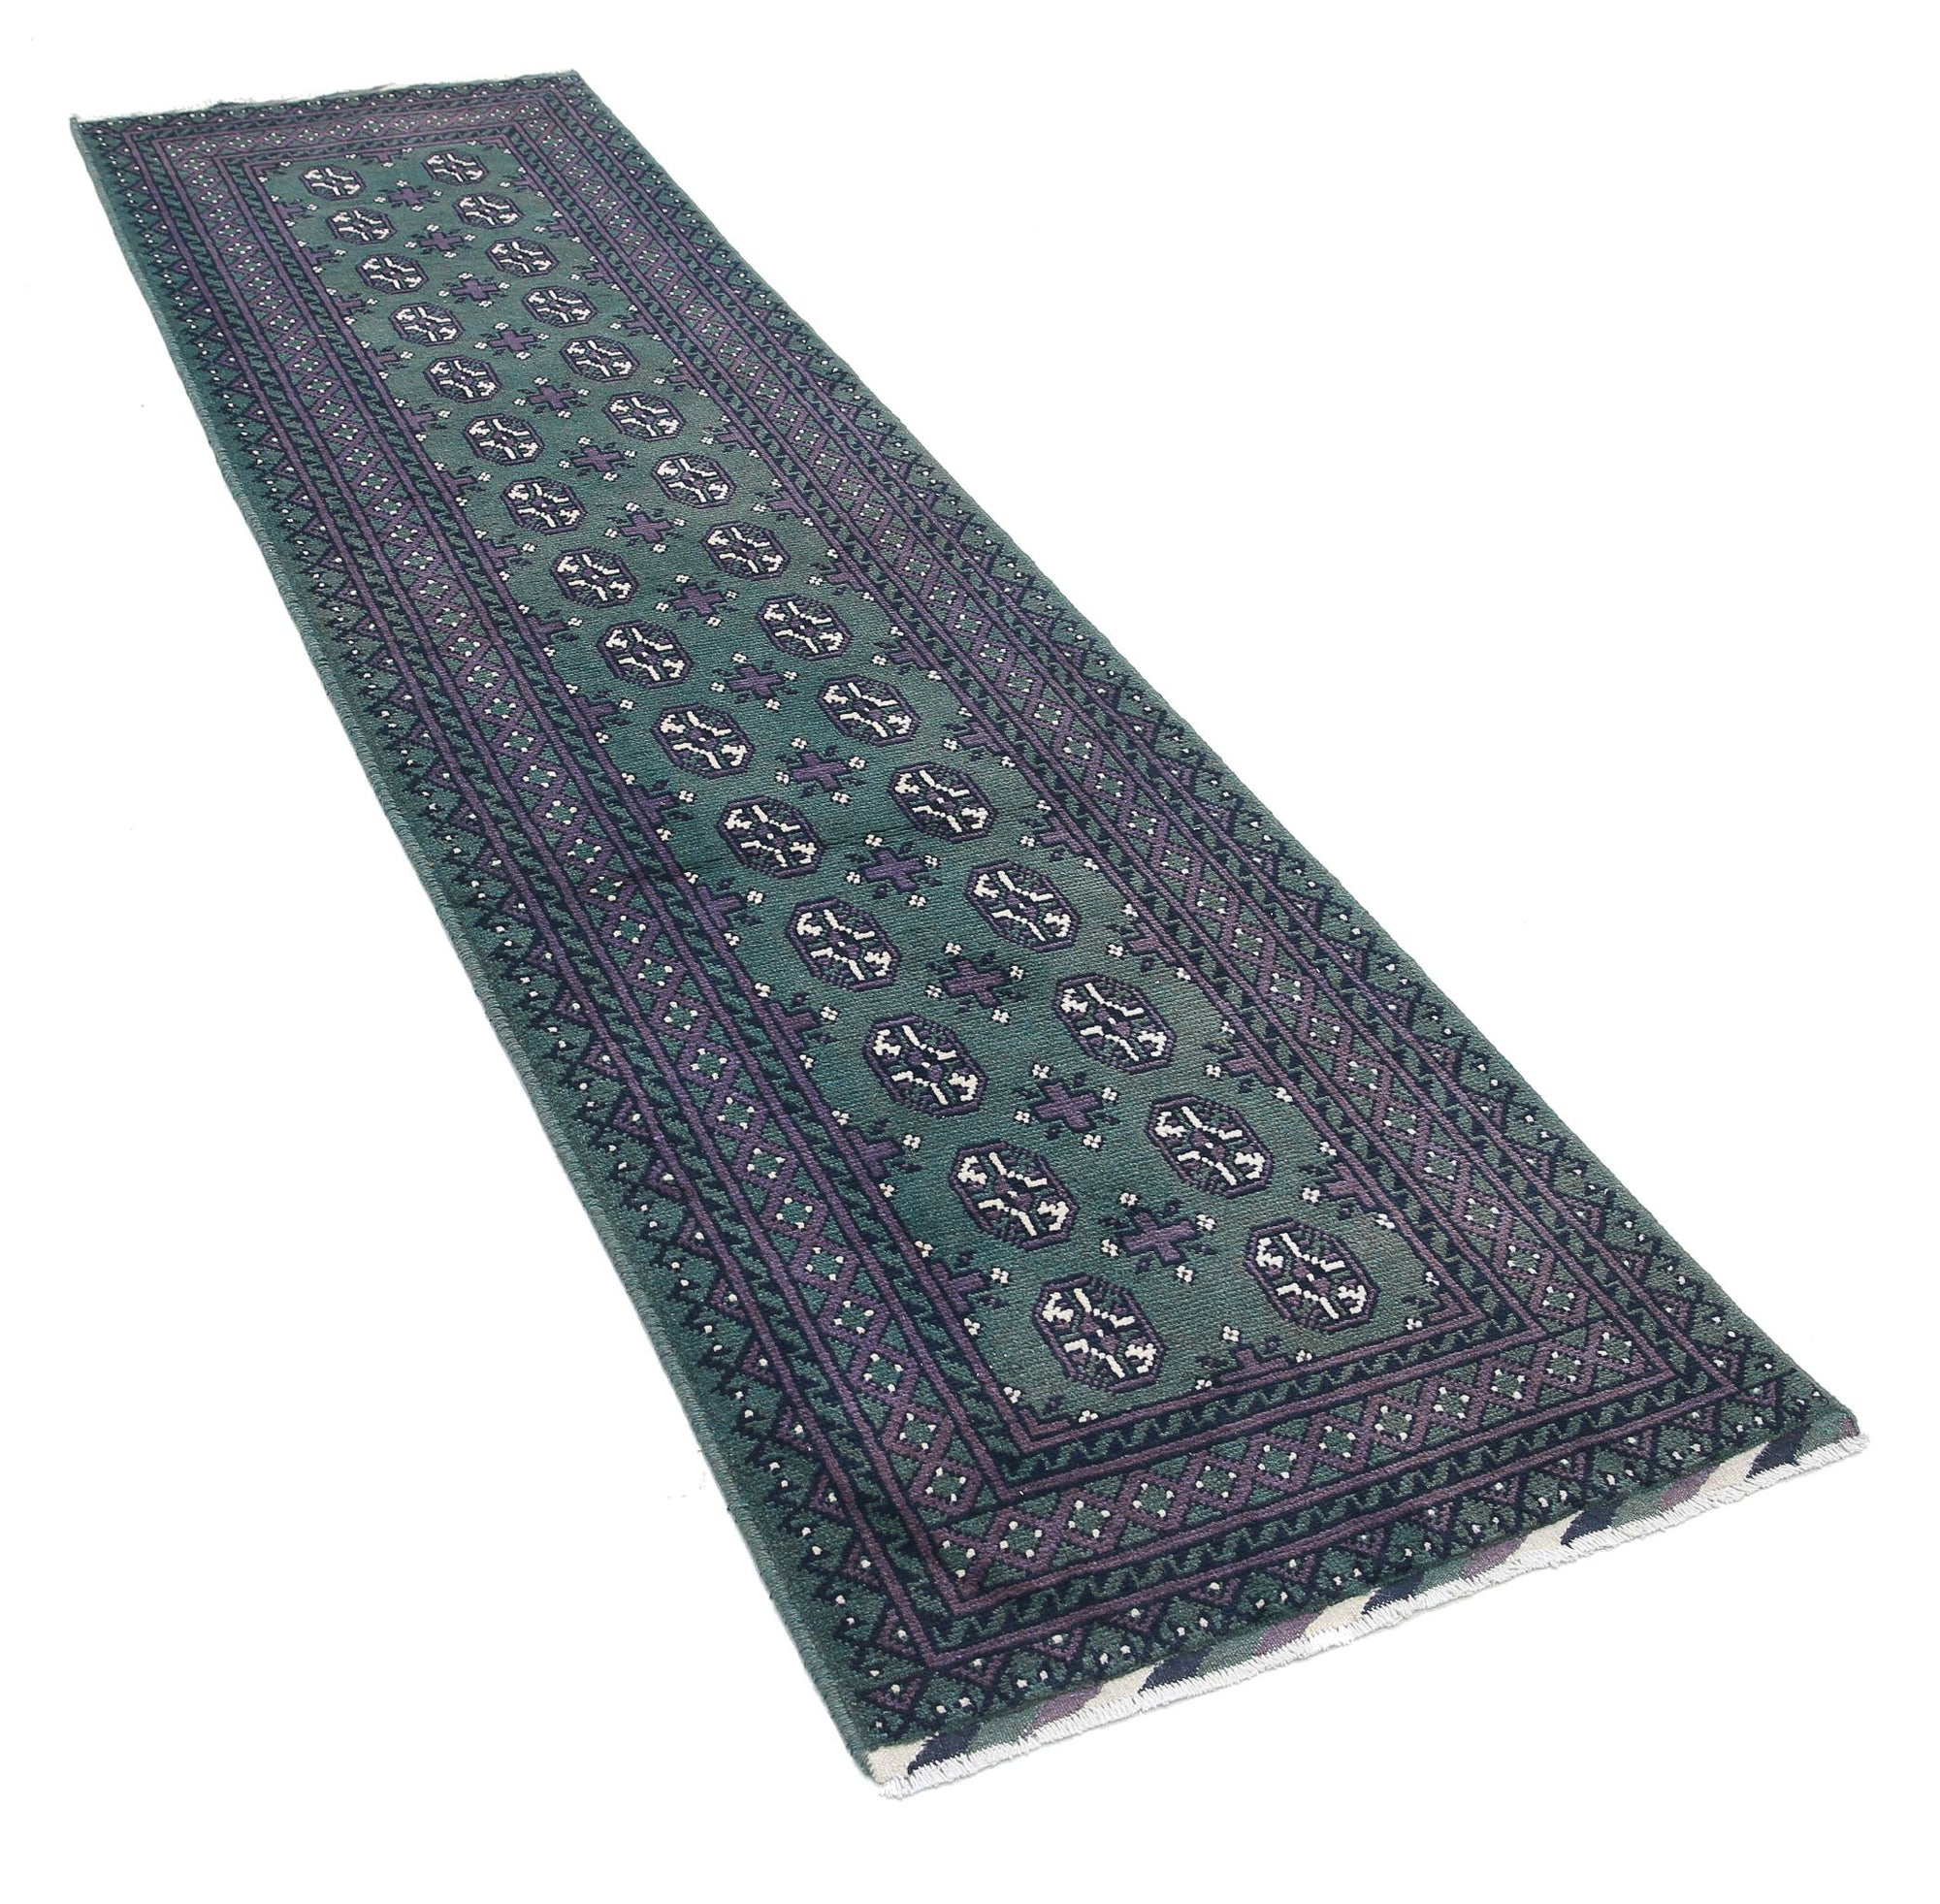 Revival-hand-knotted-gul-collection-wool-rug-5013991-1.jpg